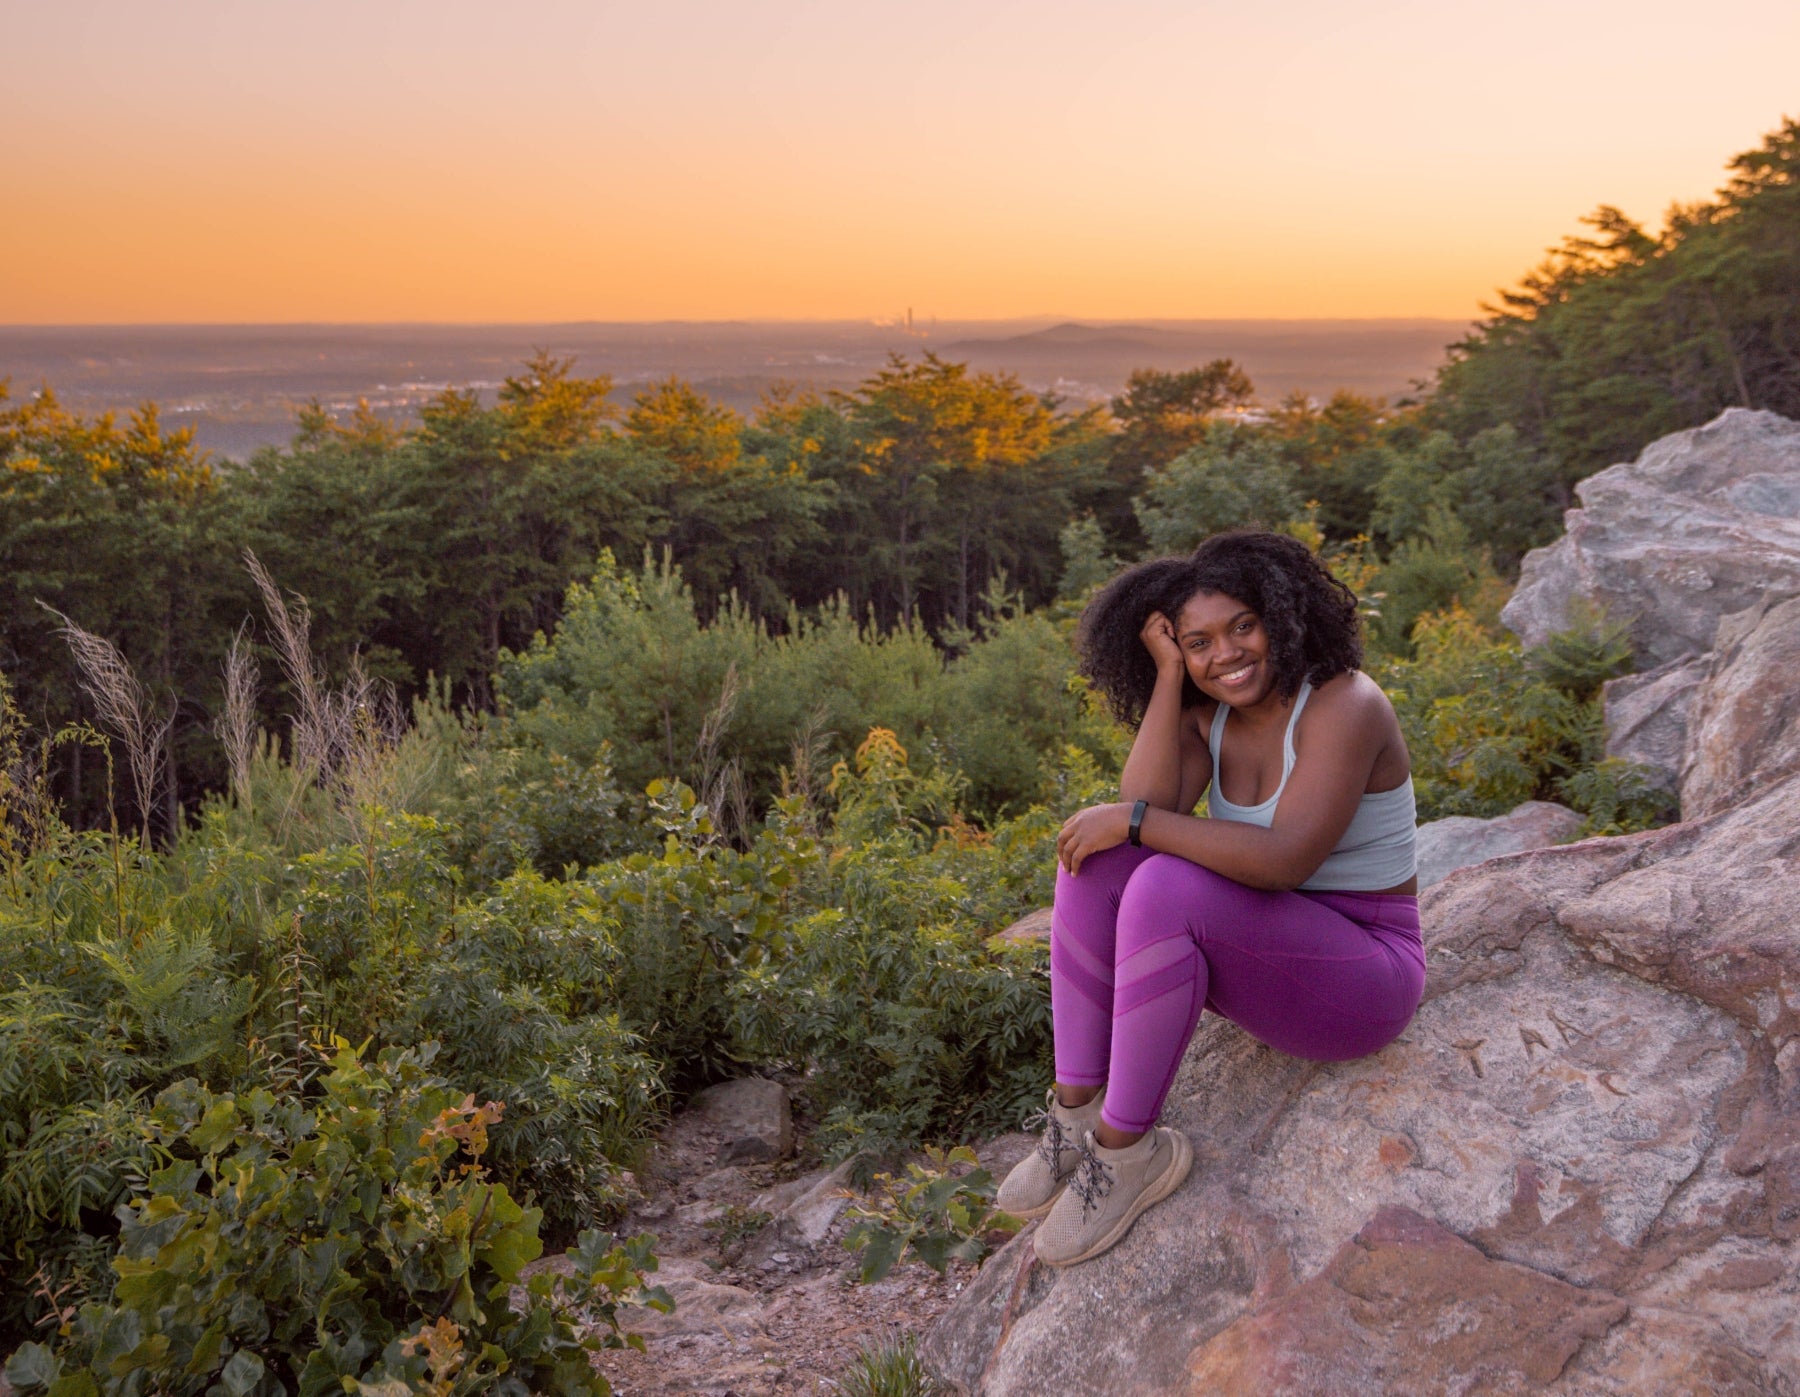 A Black Woman's Guide To Atlanta's Hiking Scene: Where To Go, What To Pack And Groups To Trek With